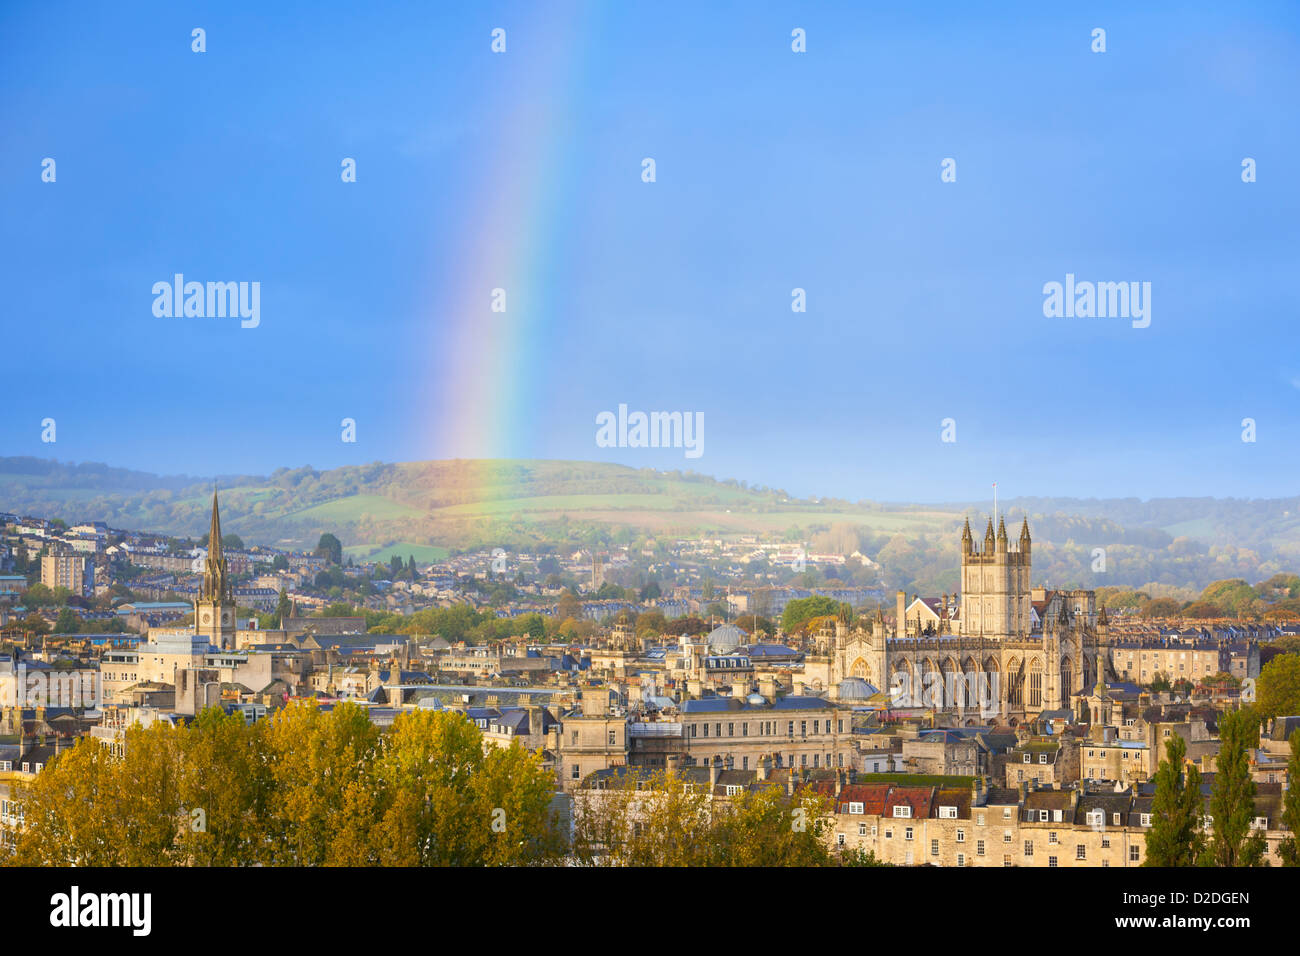 End of a rainbow in the sky over Bath in England, UK Stock Photo